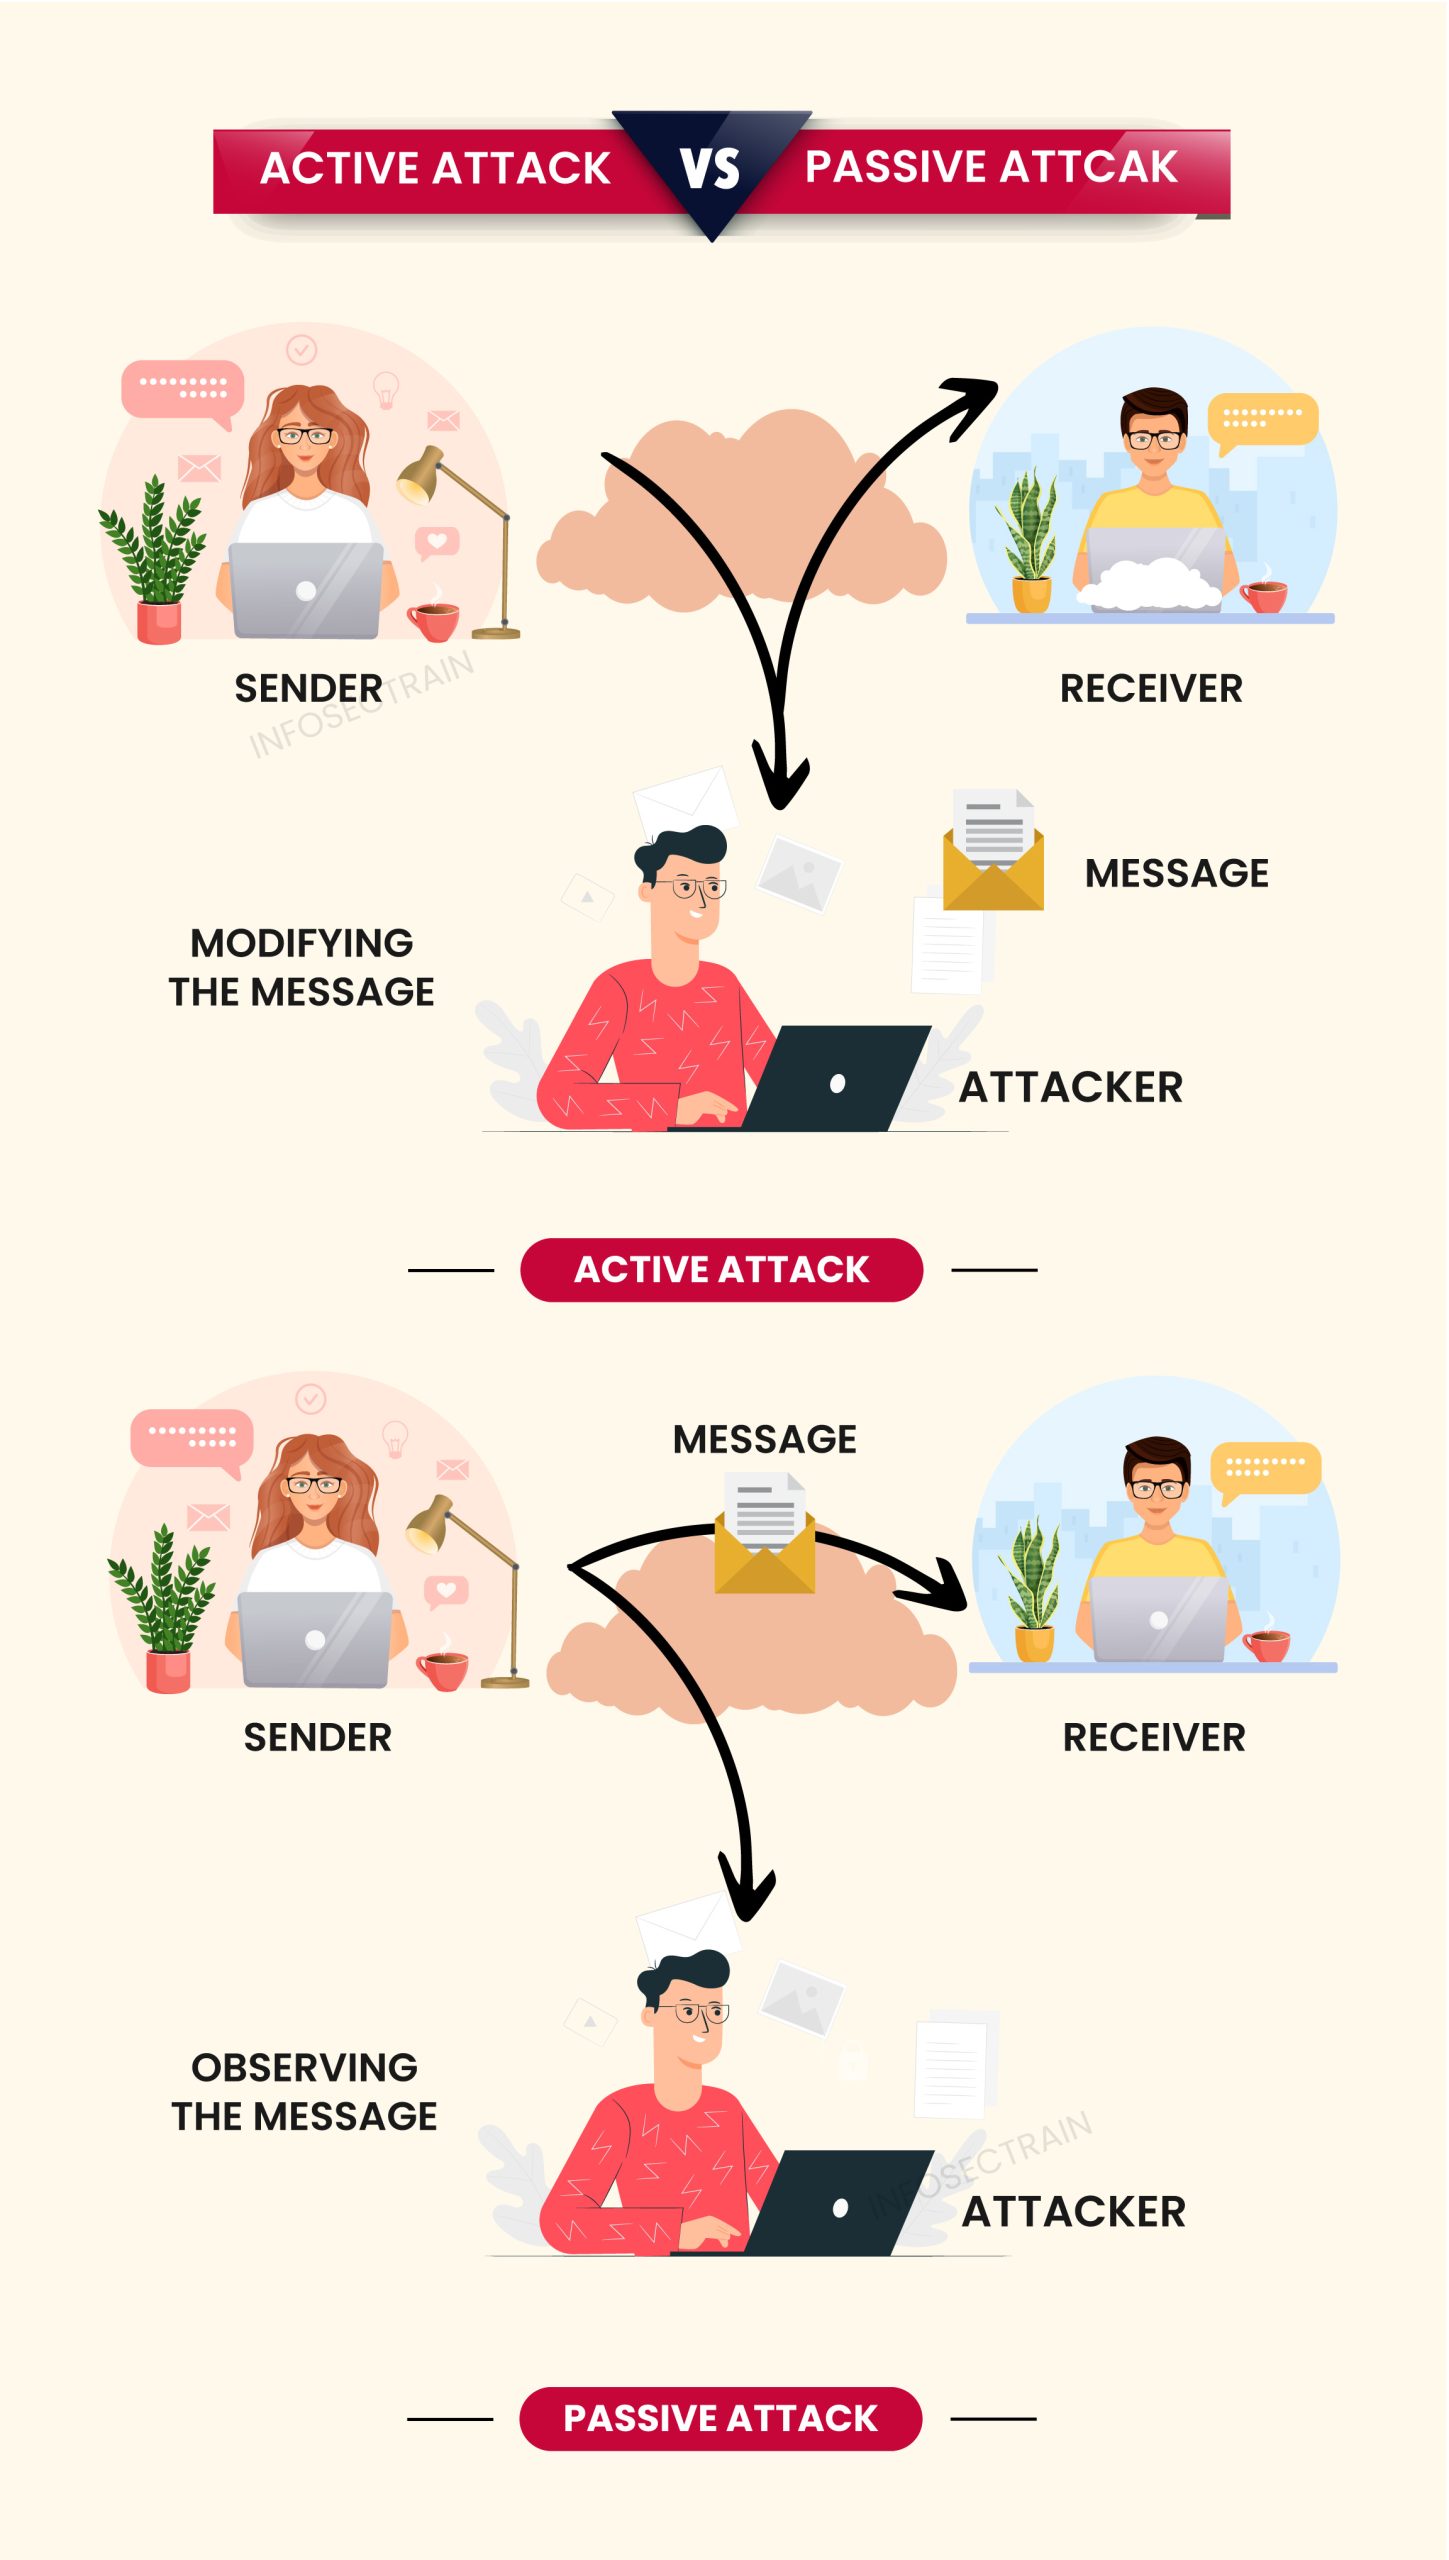 Active attack